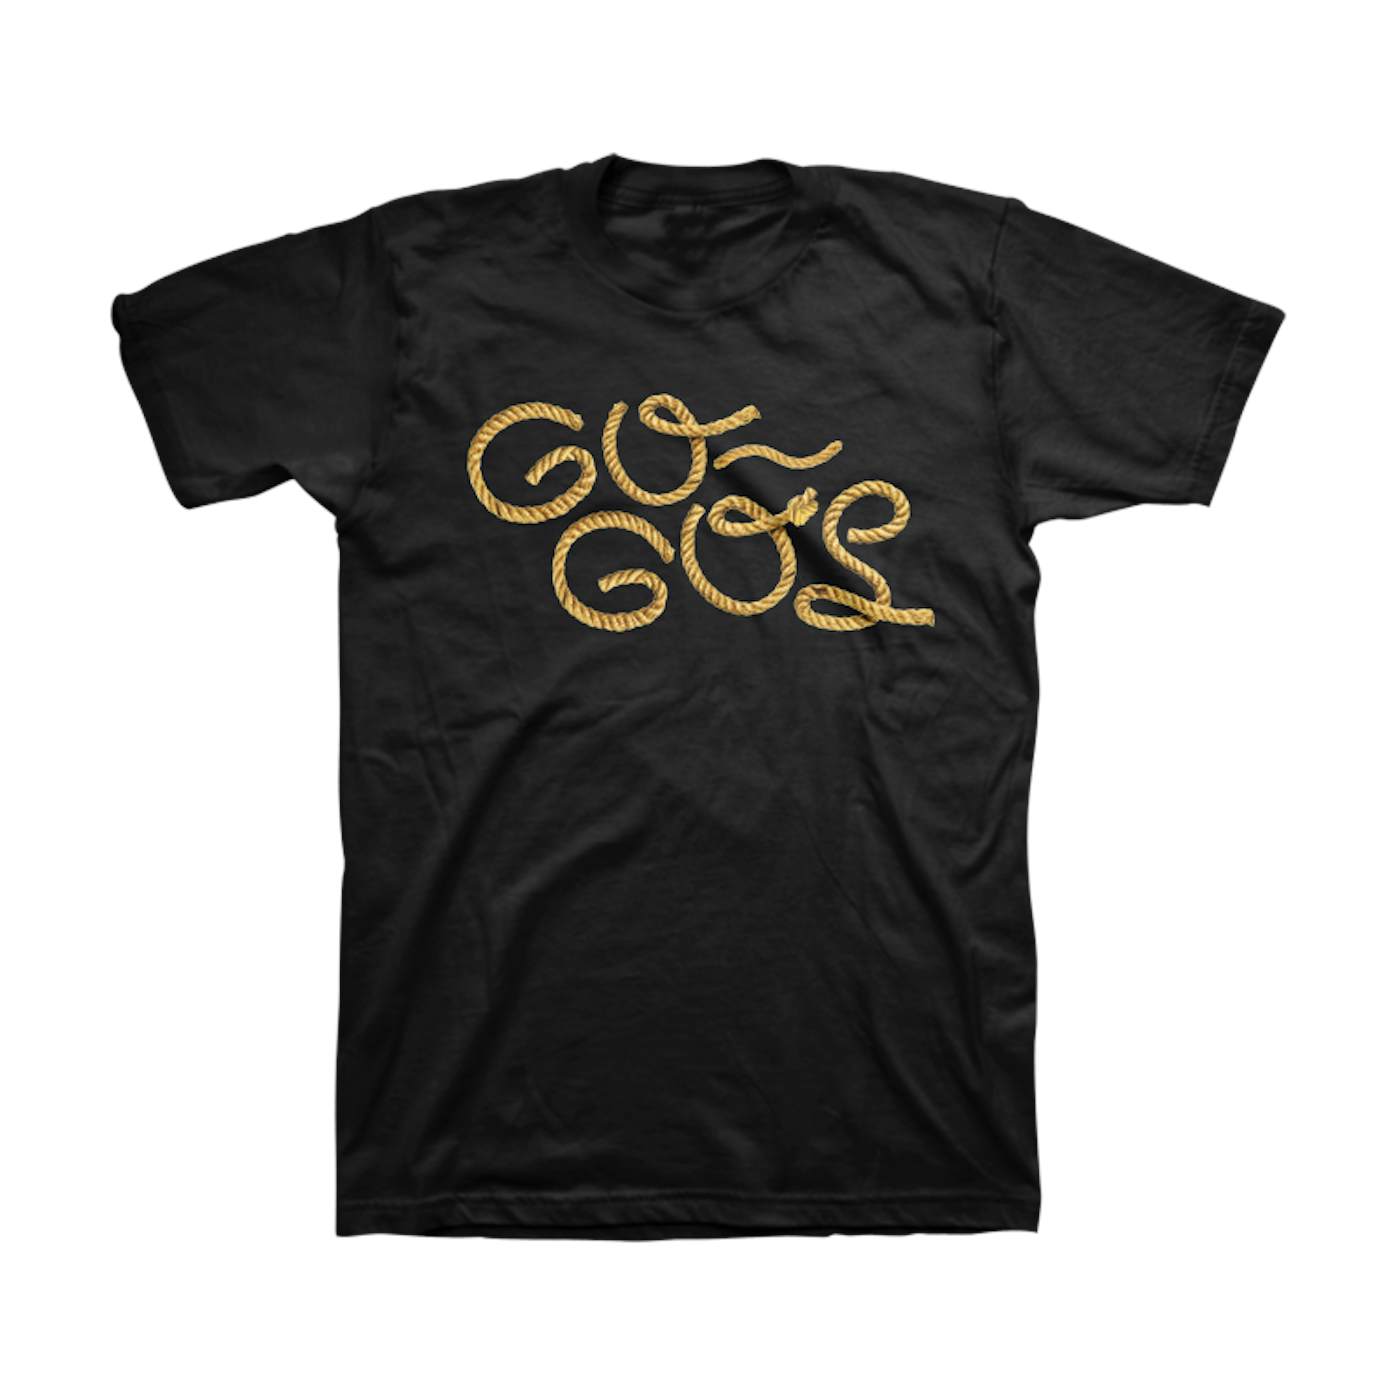 The Go-Go's Fun With Ropes Tee